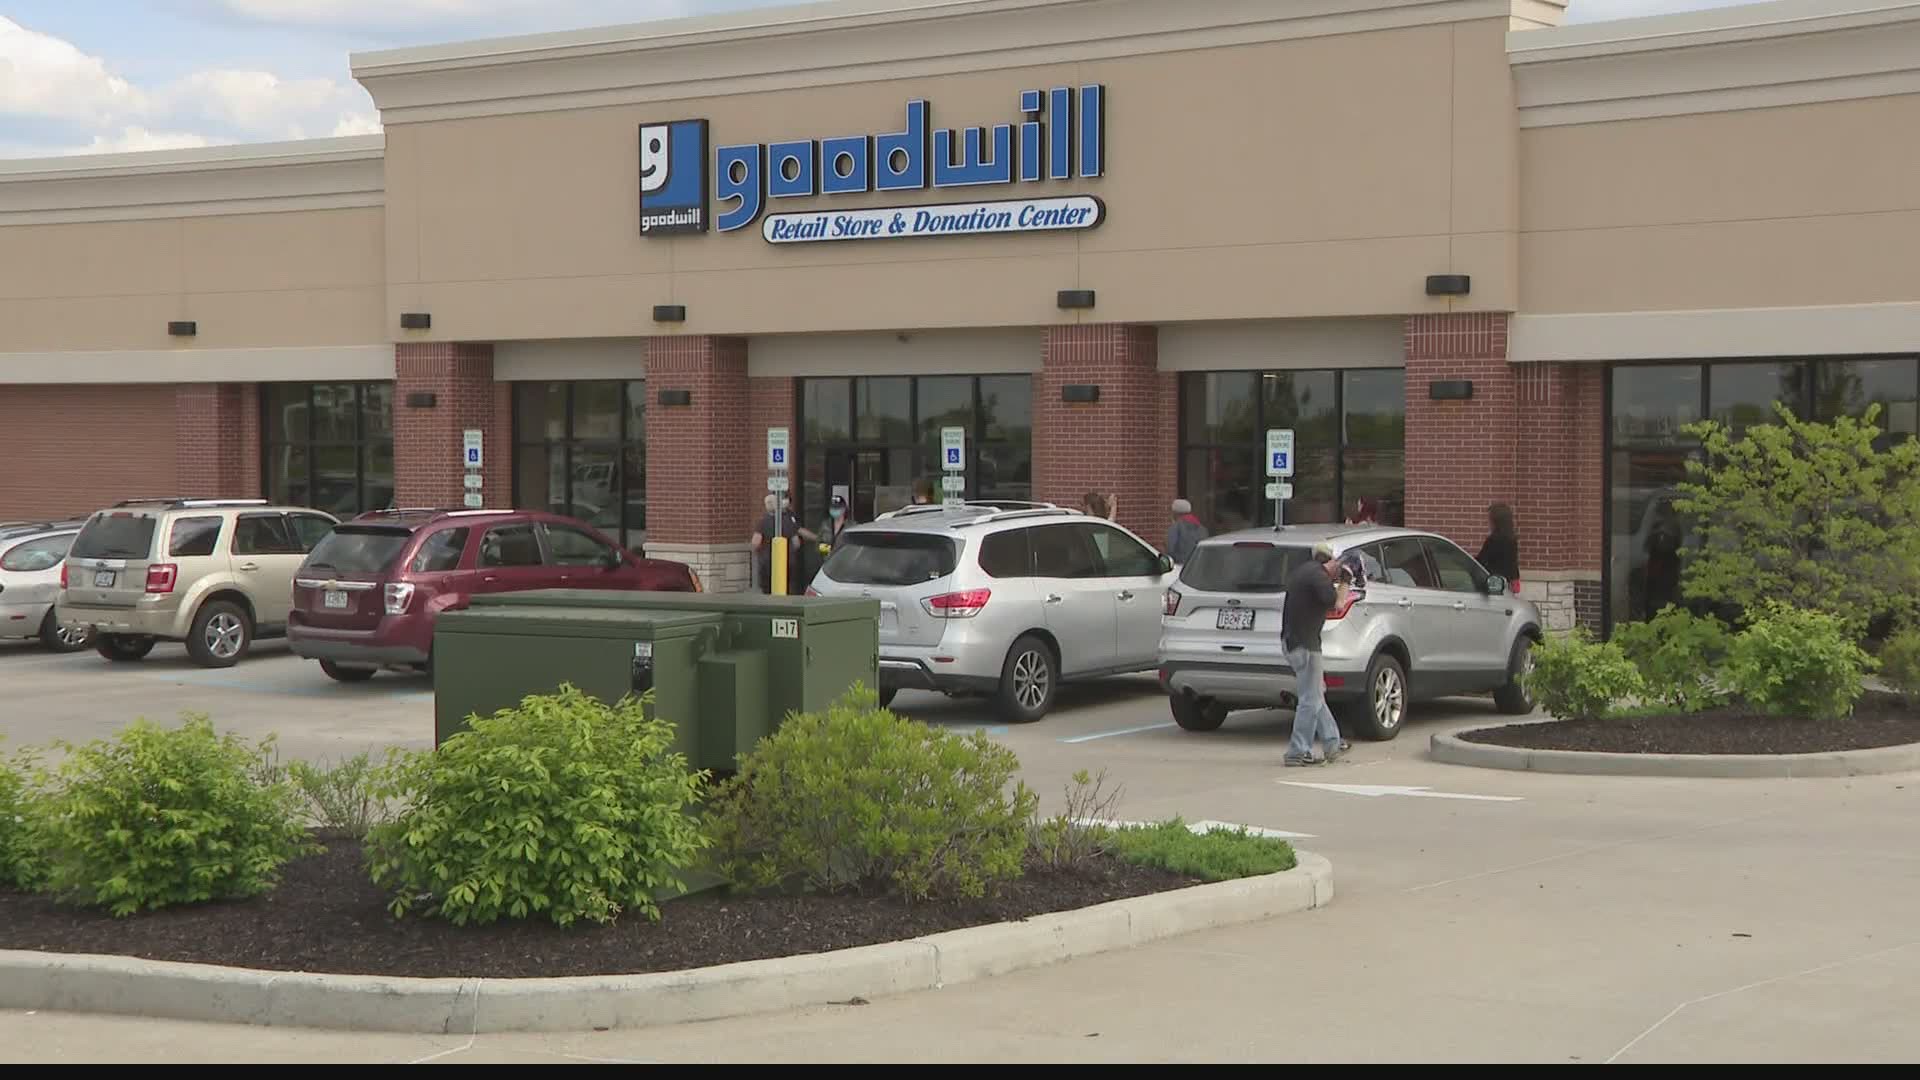 St. Louis: Goodwill to reopen May 18 | 0